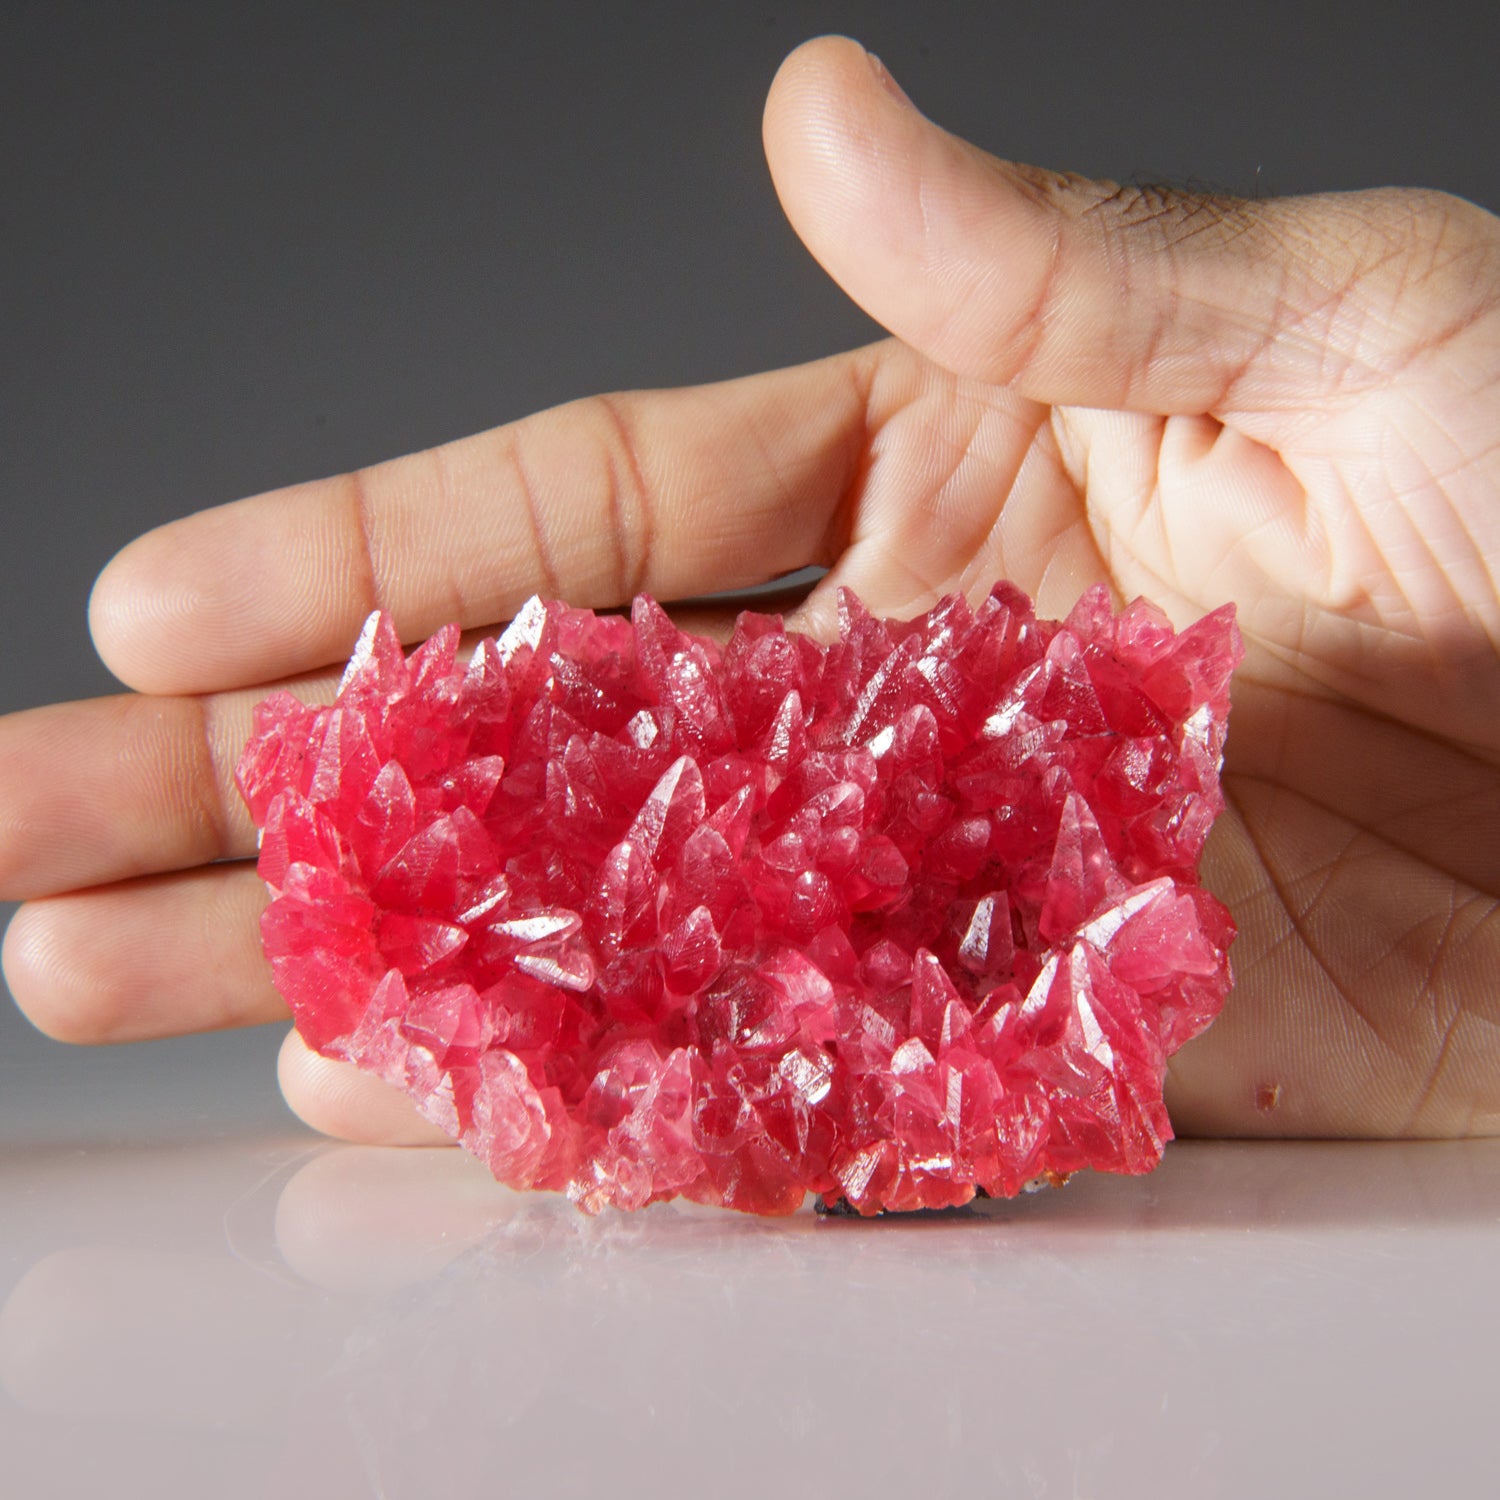 Rhodochrosite from N'Chwaning Mine, Northern Cape Province, South Africa